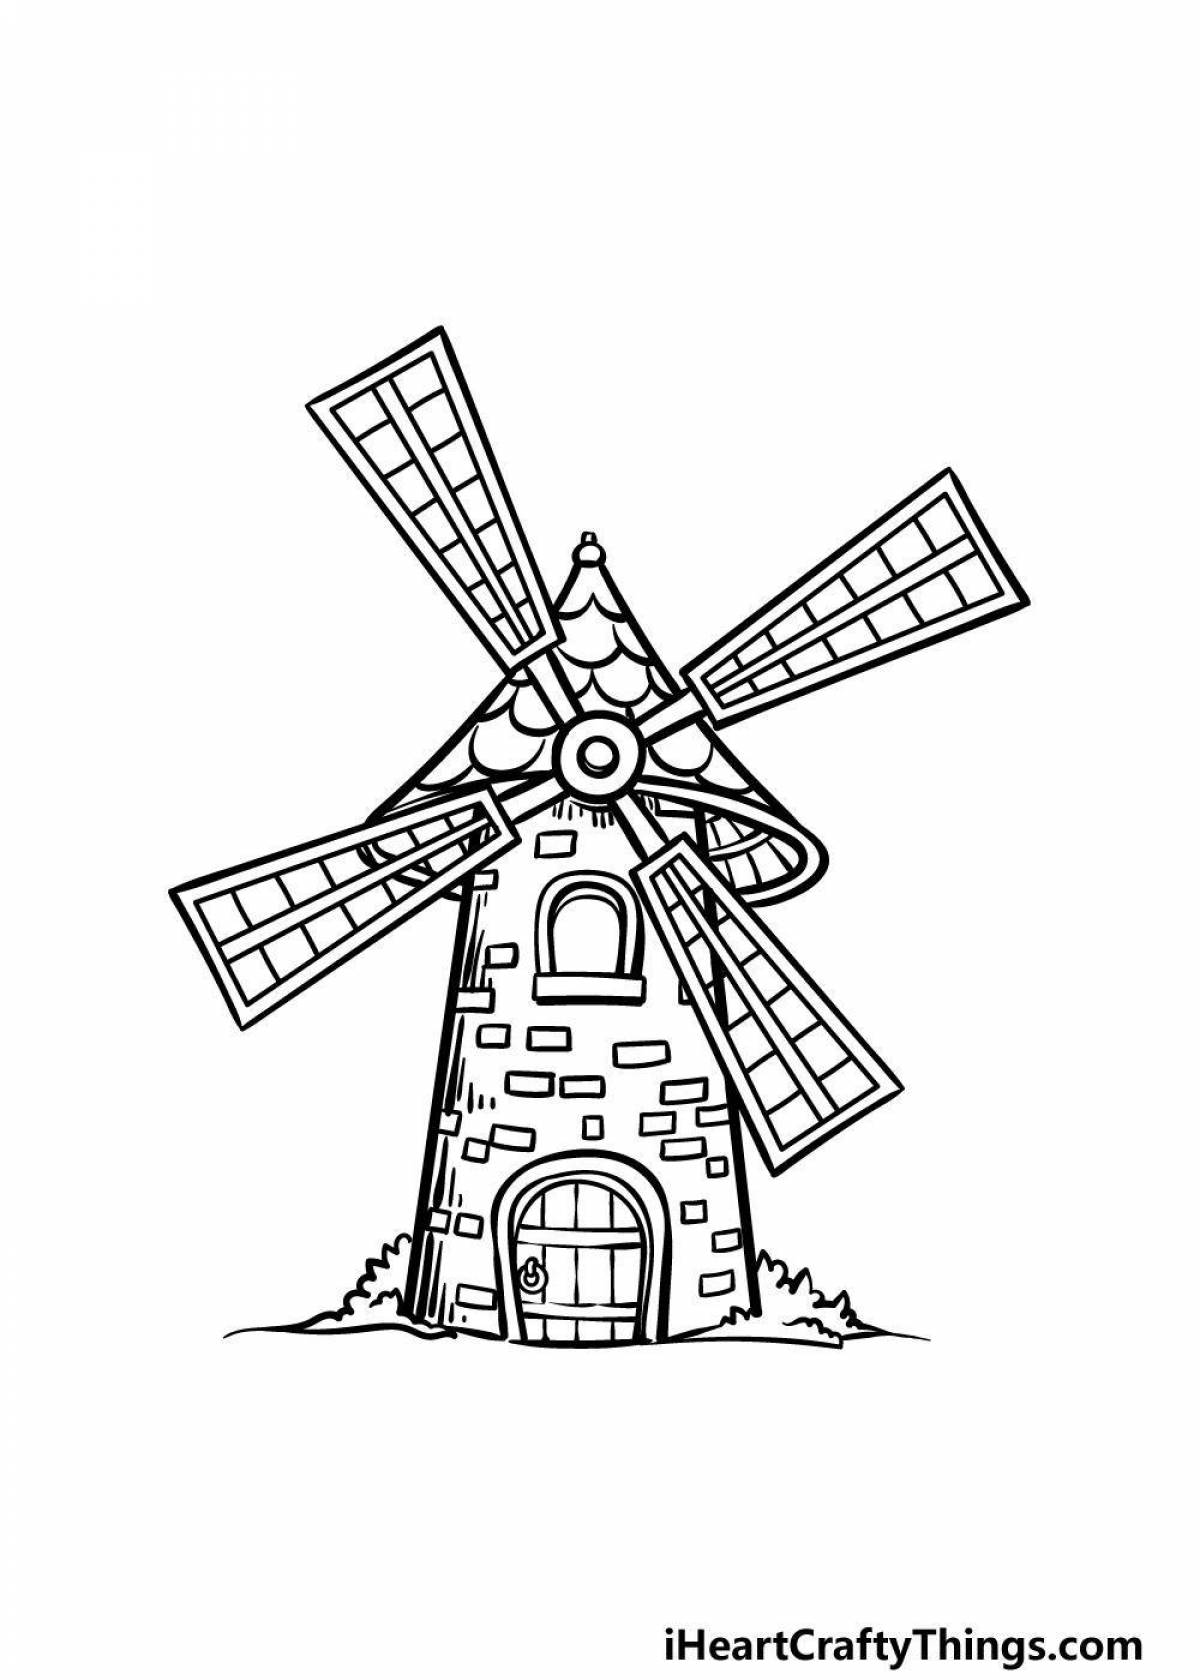 Colouring windmill with colored splashes for children